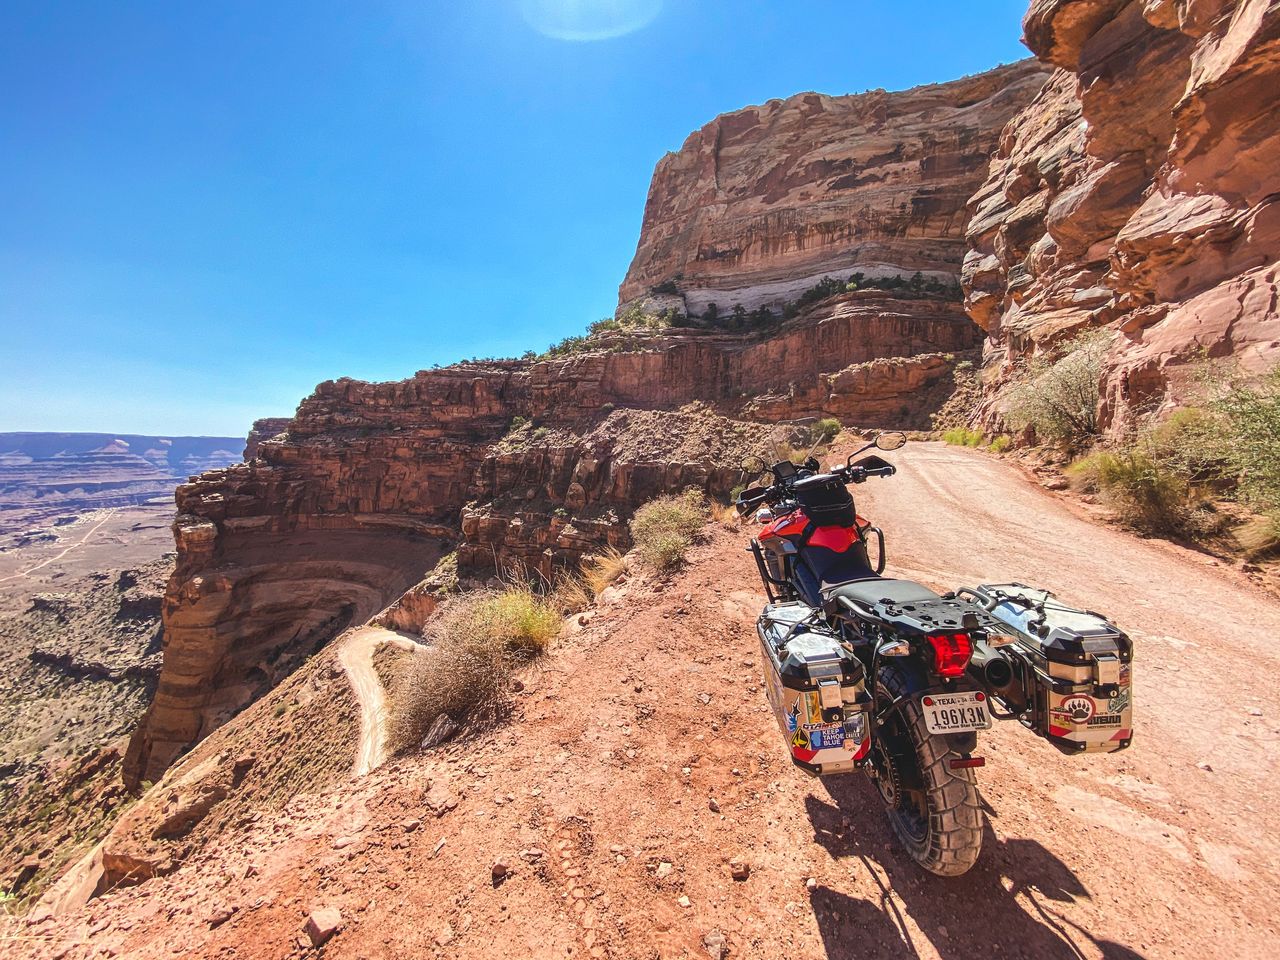 Conquering fears on Shafer Canyon Road, Canyonlands National Park, Utah